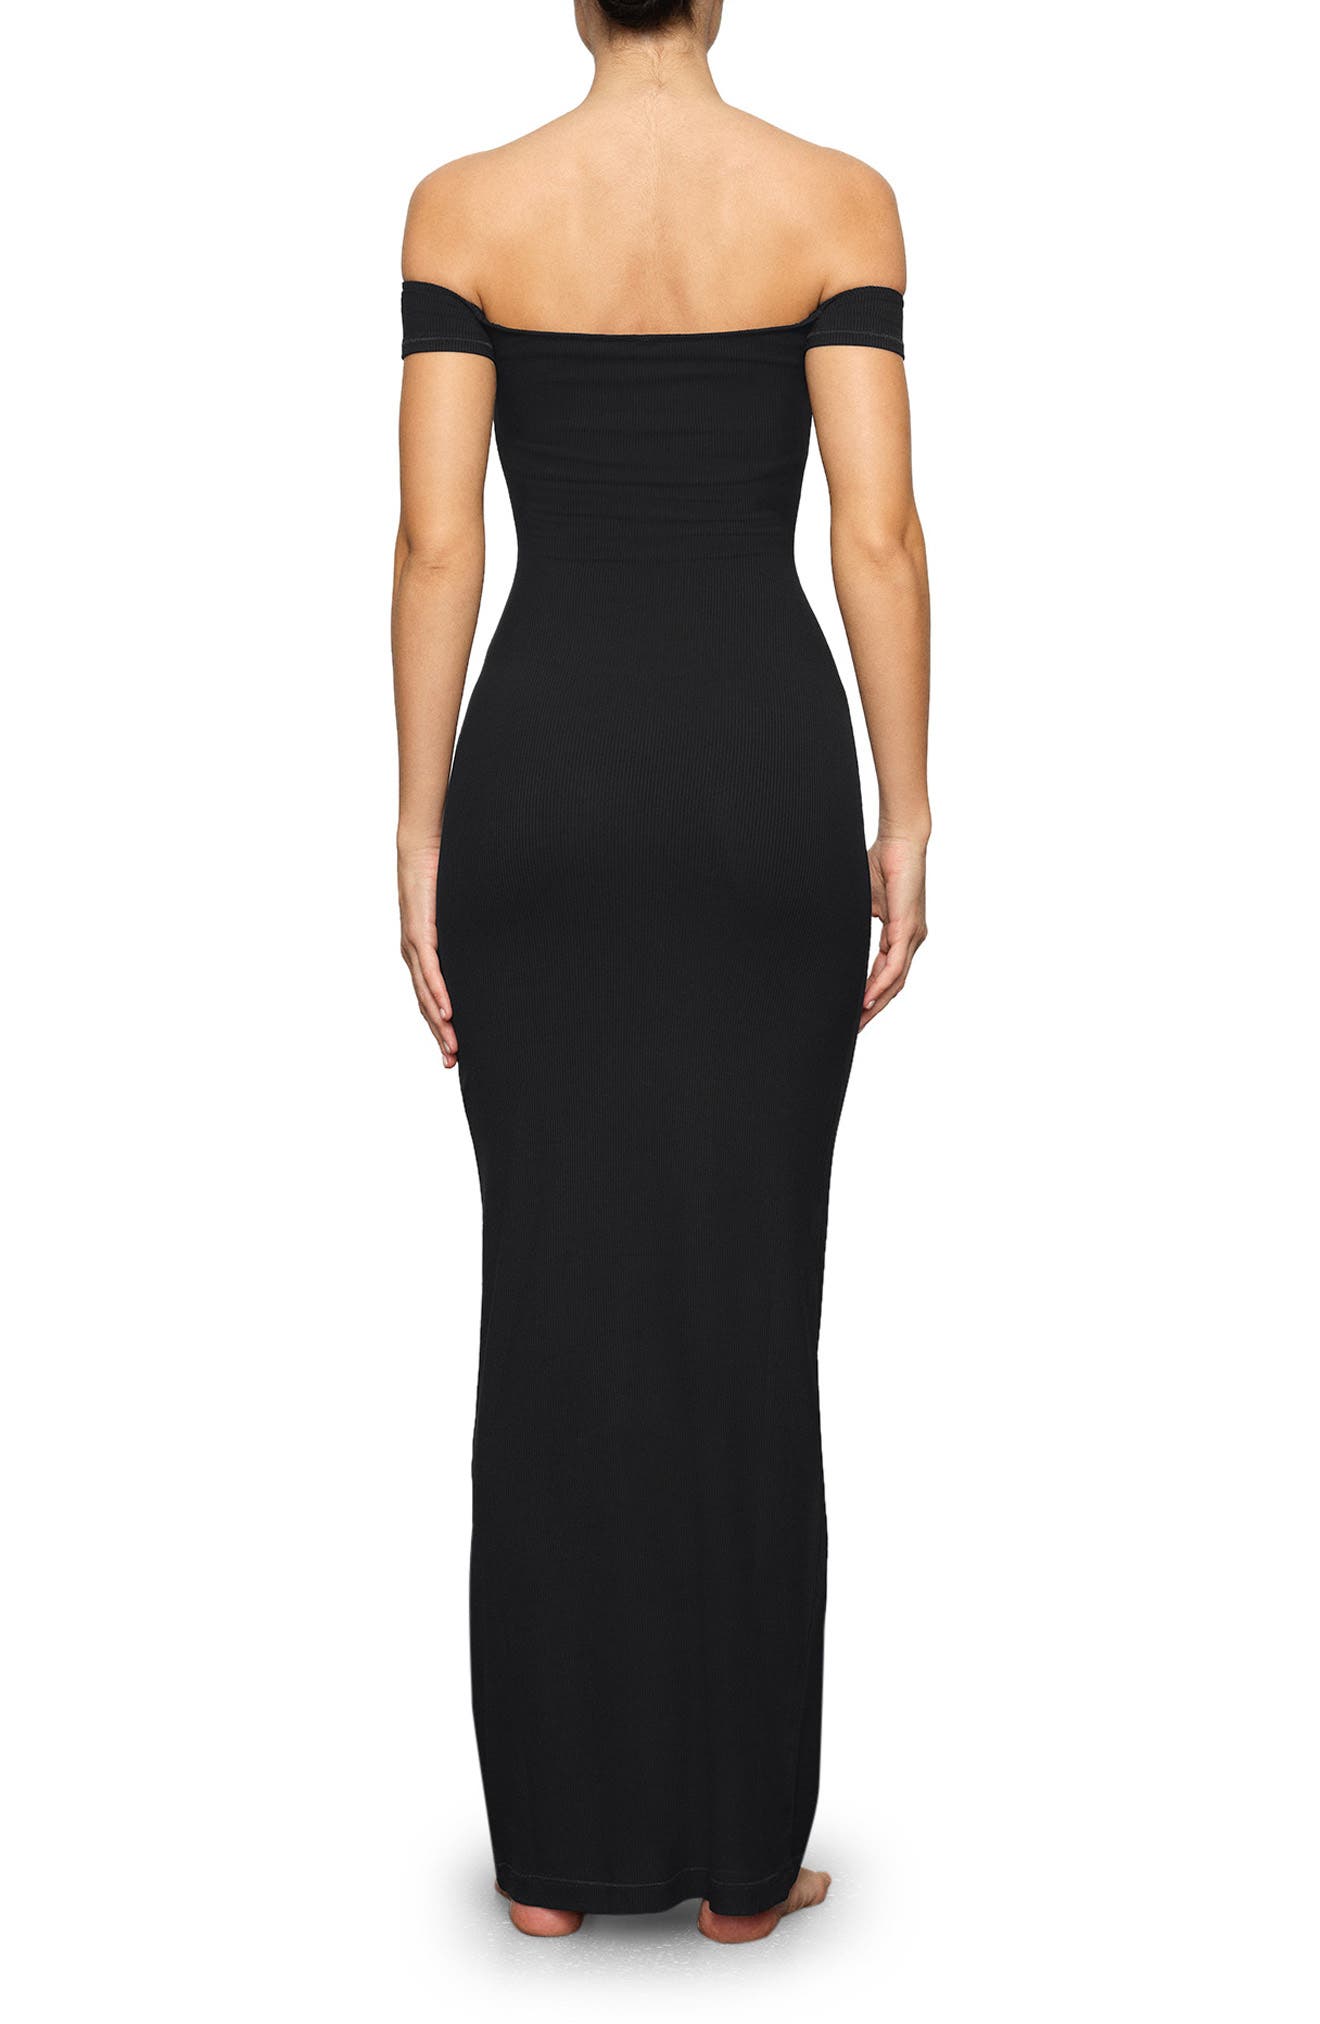 SKIMS Off the Shoulder Body-Con Nightgown in Onyx